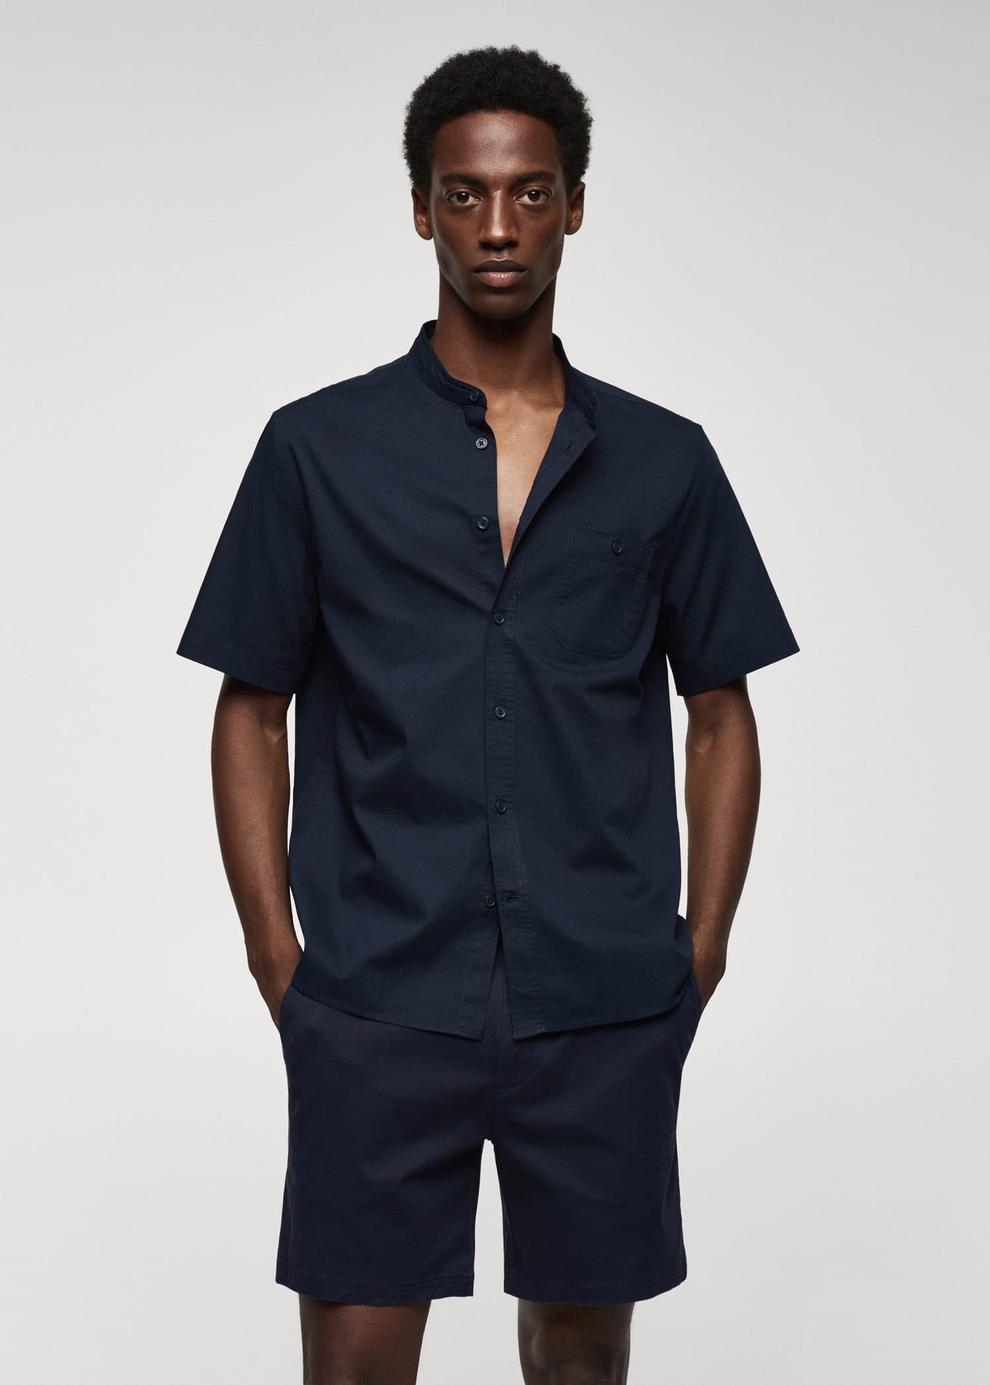 100% cotton mandarin collar shirt offers at S$ 49.9 in HE by Mango